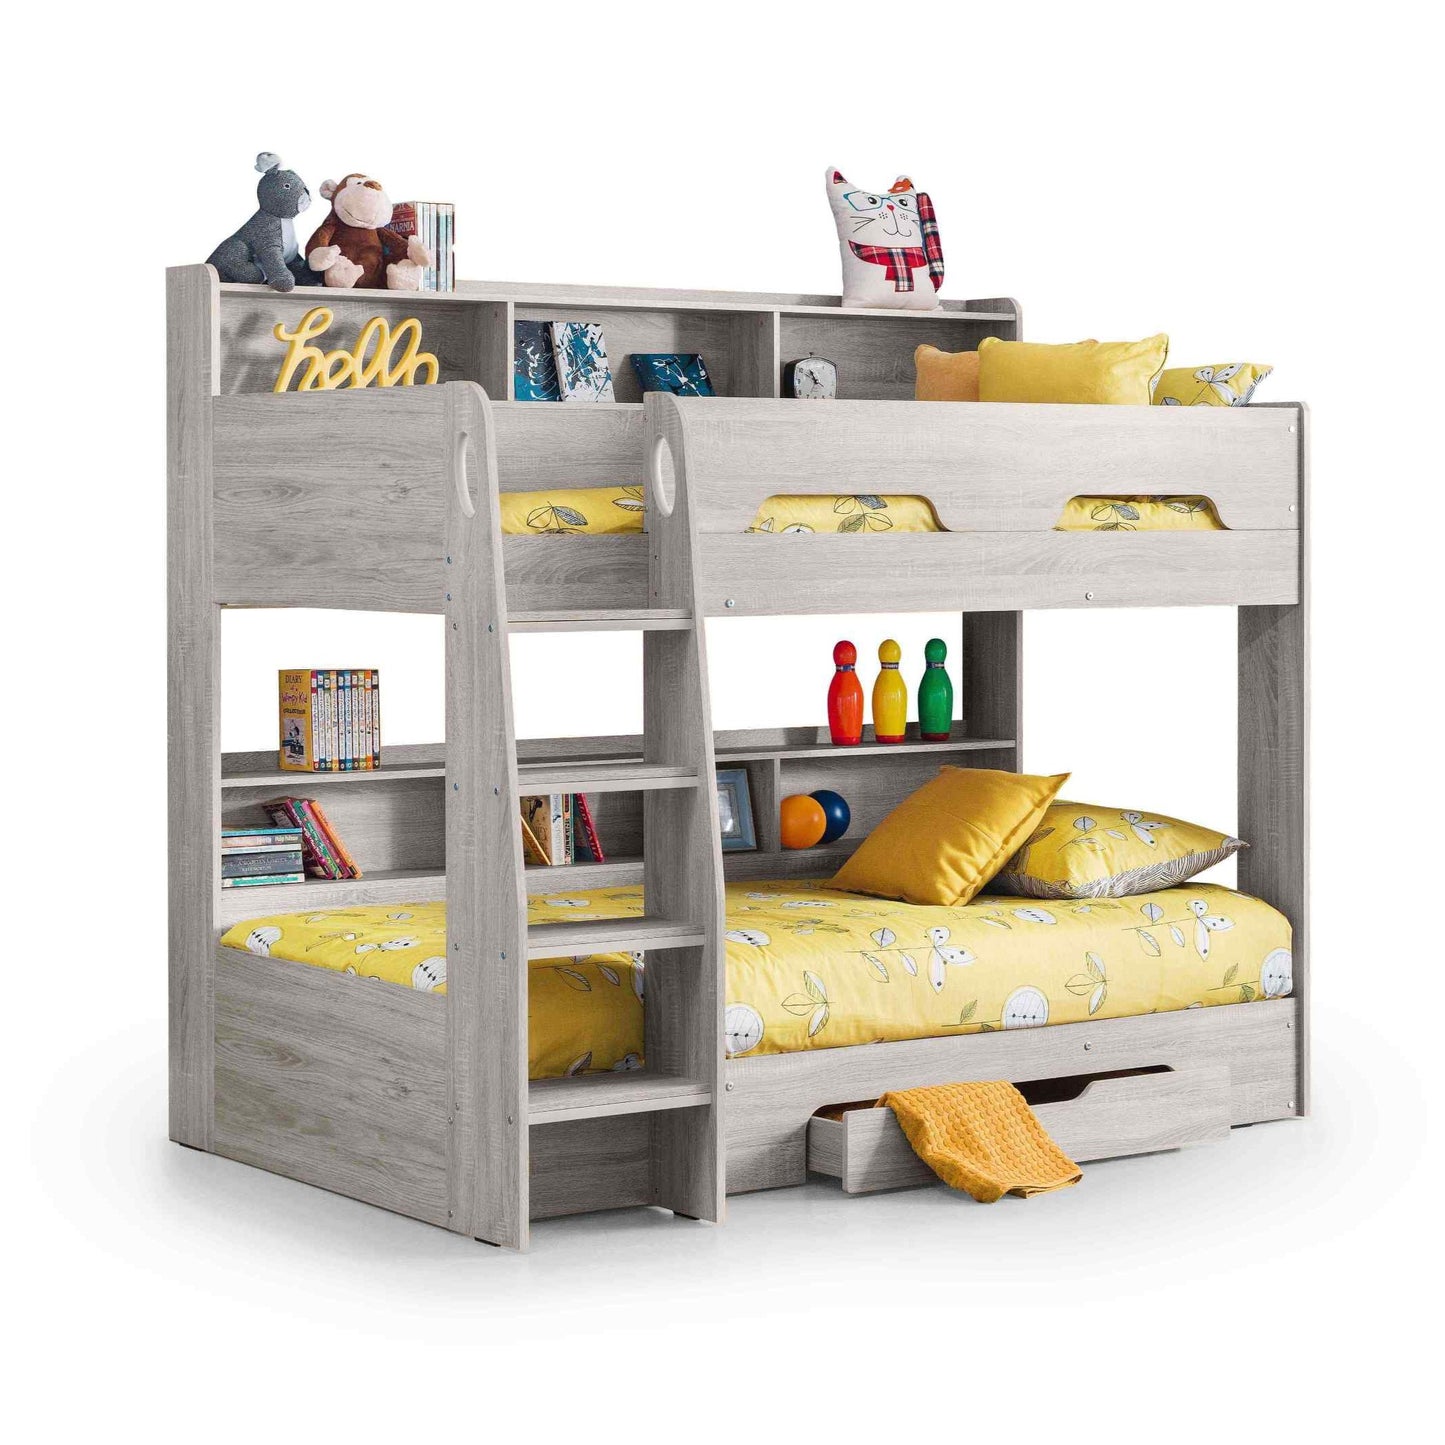 Orion bunk bed in grey oak white background